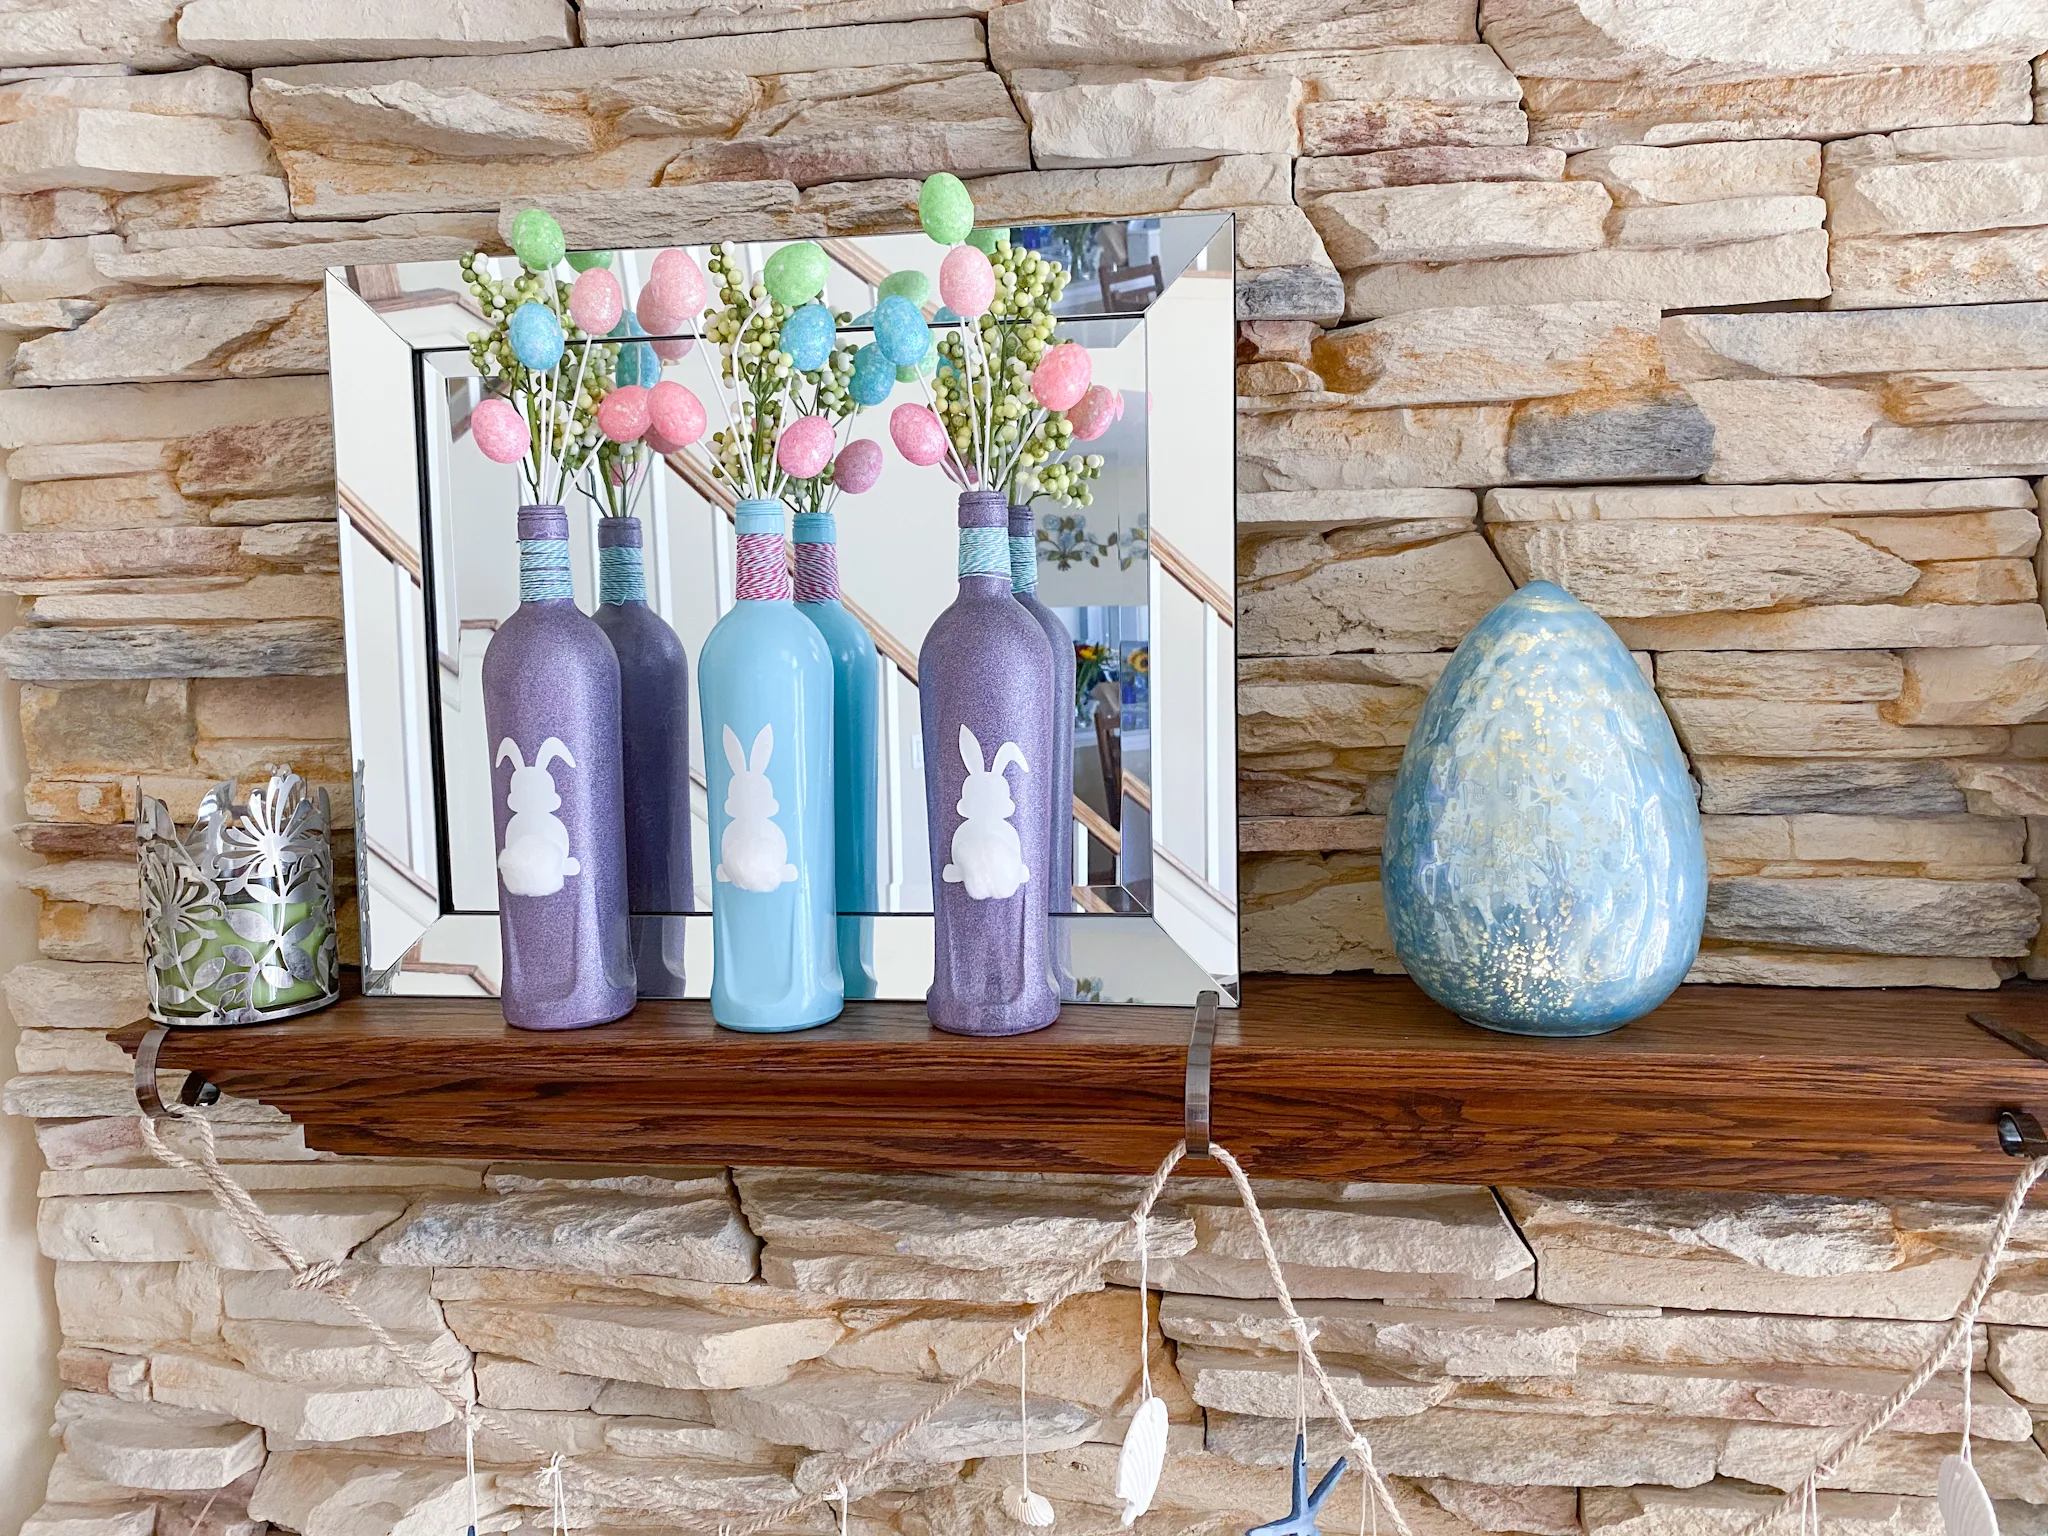 2 purple & 1 aqua bottle with white bunny silhouette labels, cotton ball tails, pink & aqua twine on bottle necks, glitter egg and green berry sprays on mantel with aqua glass egg